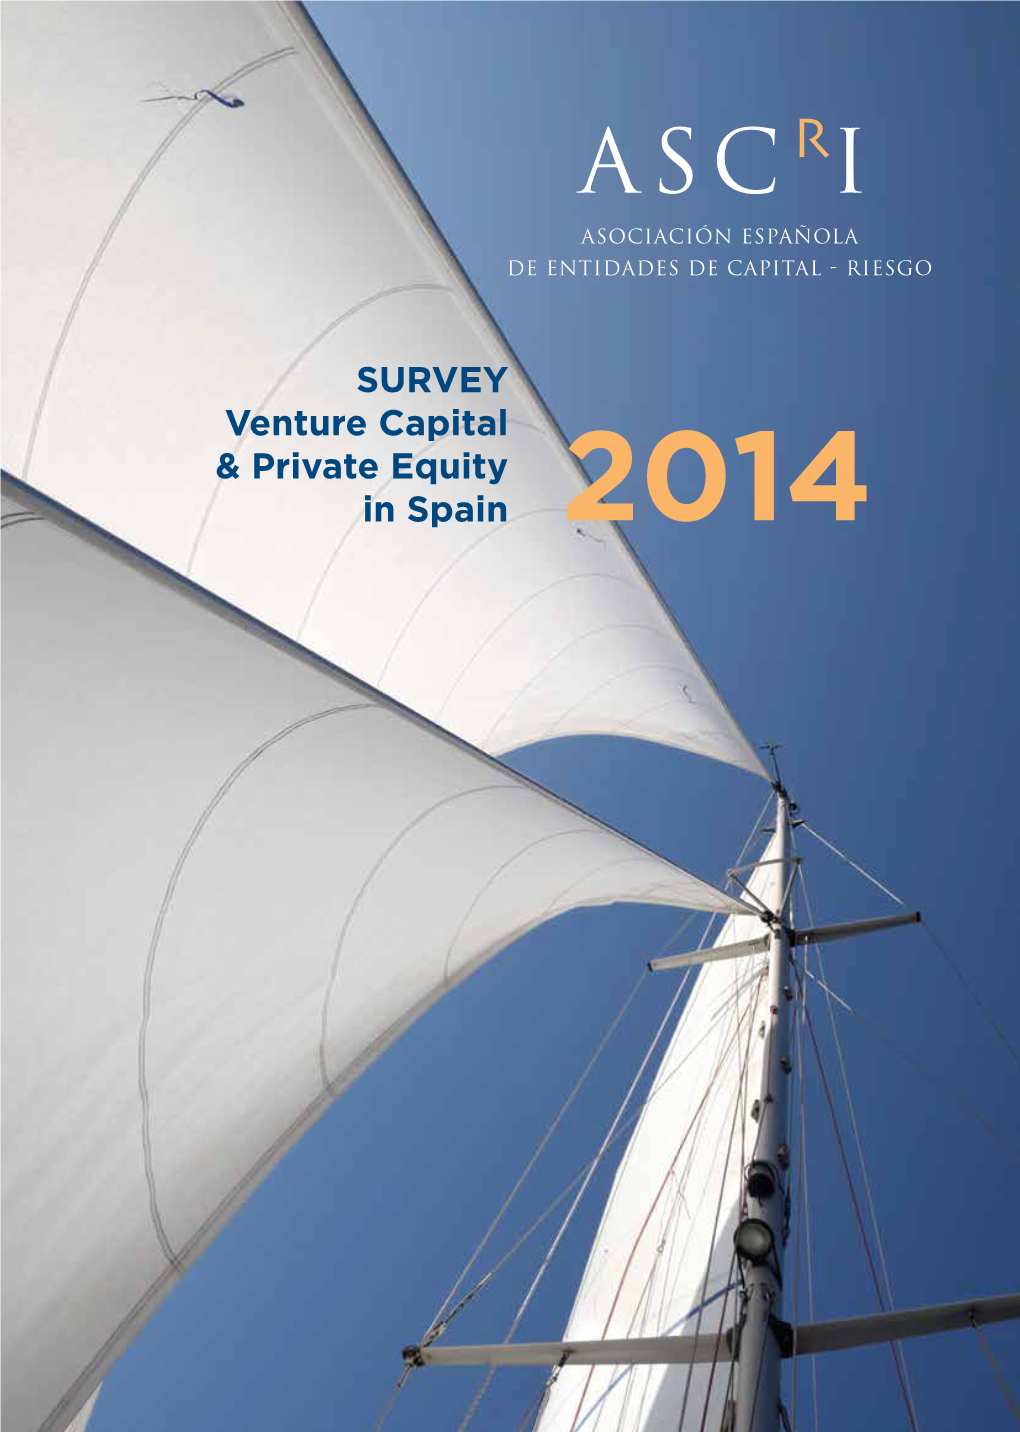 SURVEY Venture Capital & Private Equity in Spain